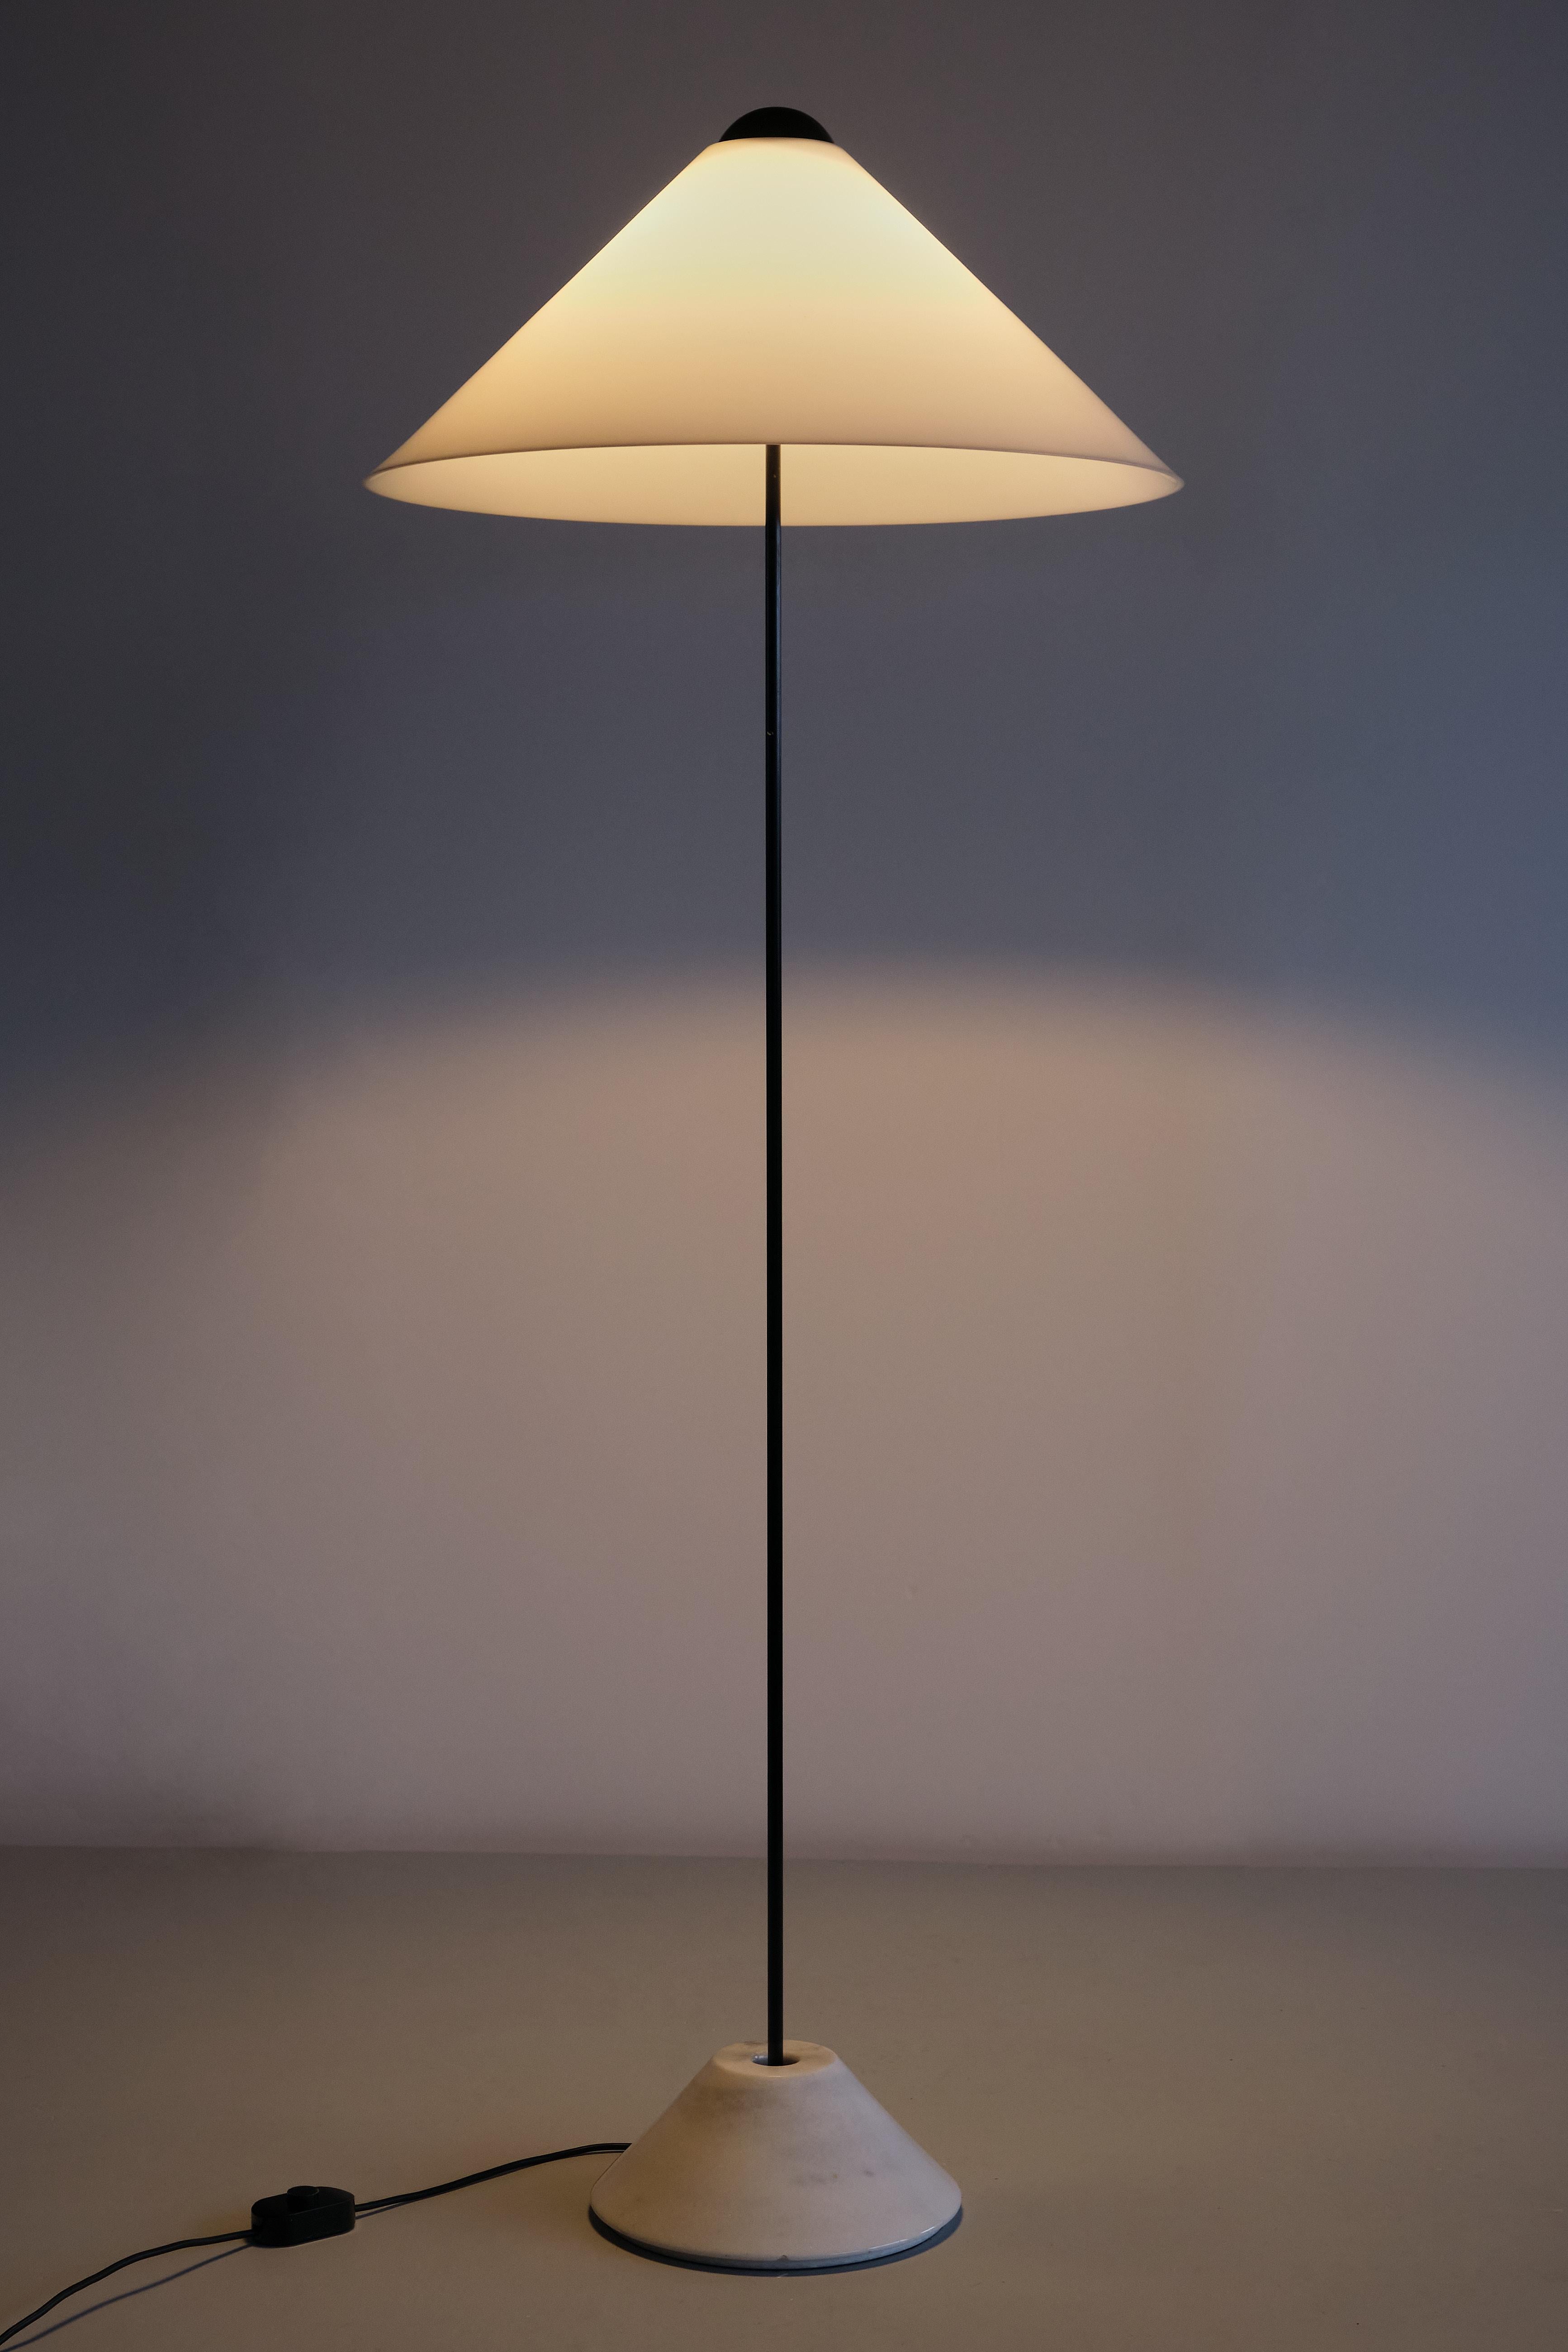 Steel Vico Magistretti 'Snow' Floor Lamp in Metal and Marble, Oluce, Italy, 1973 For Sale